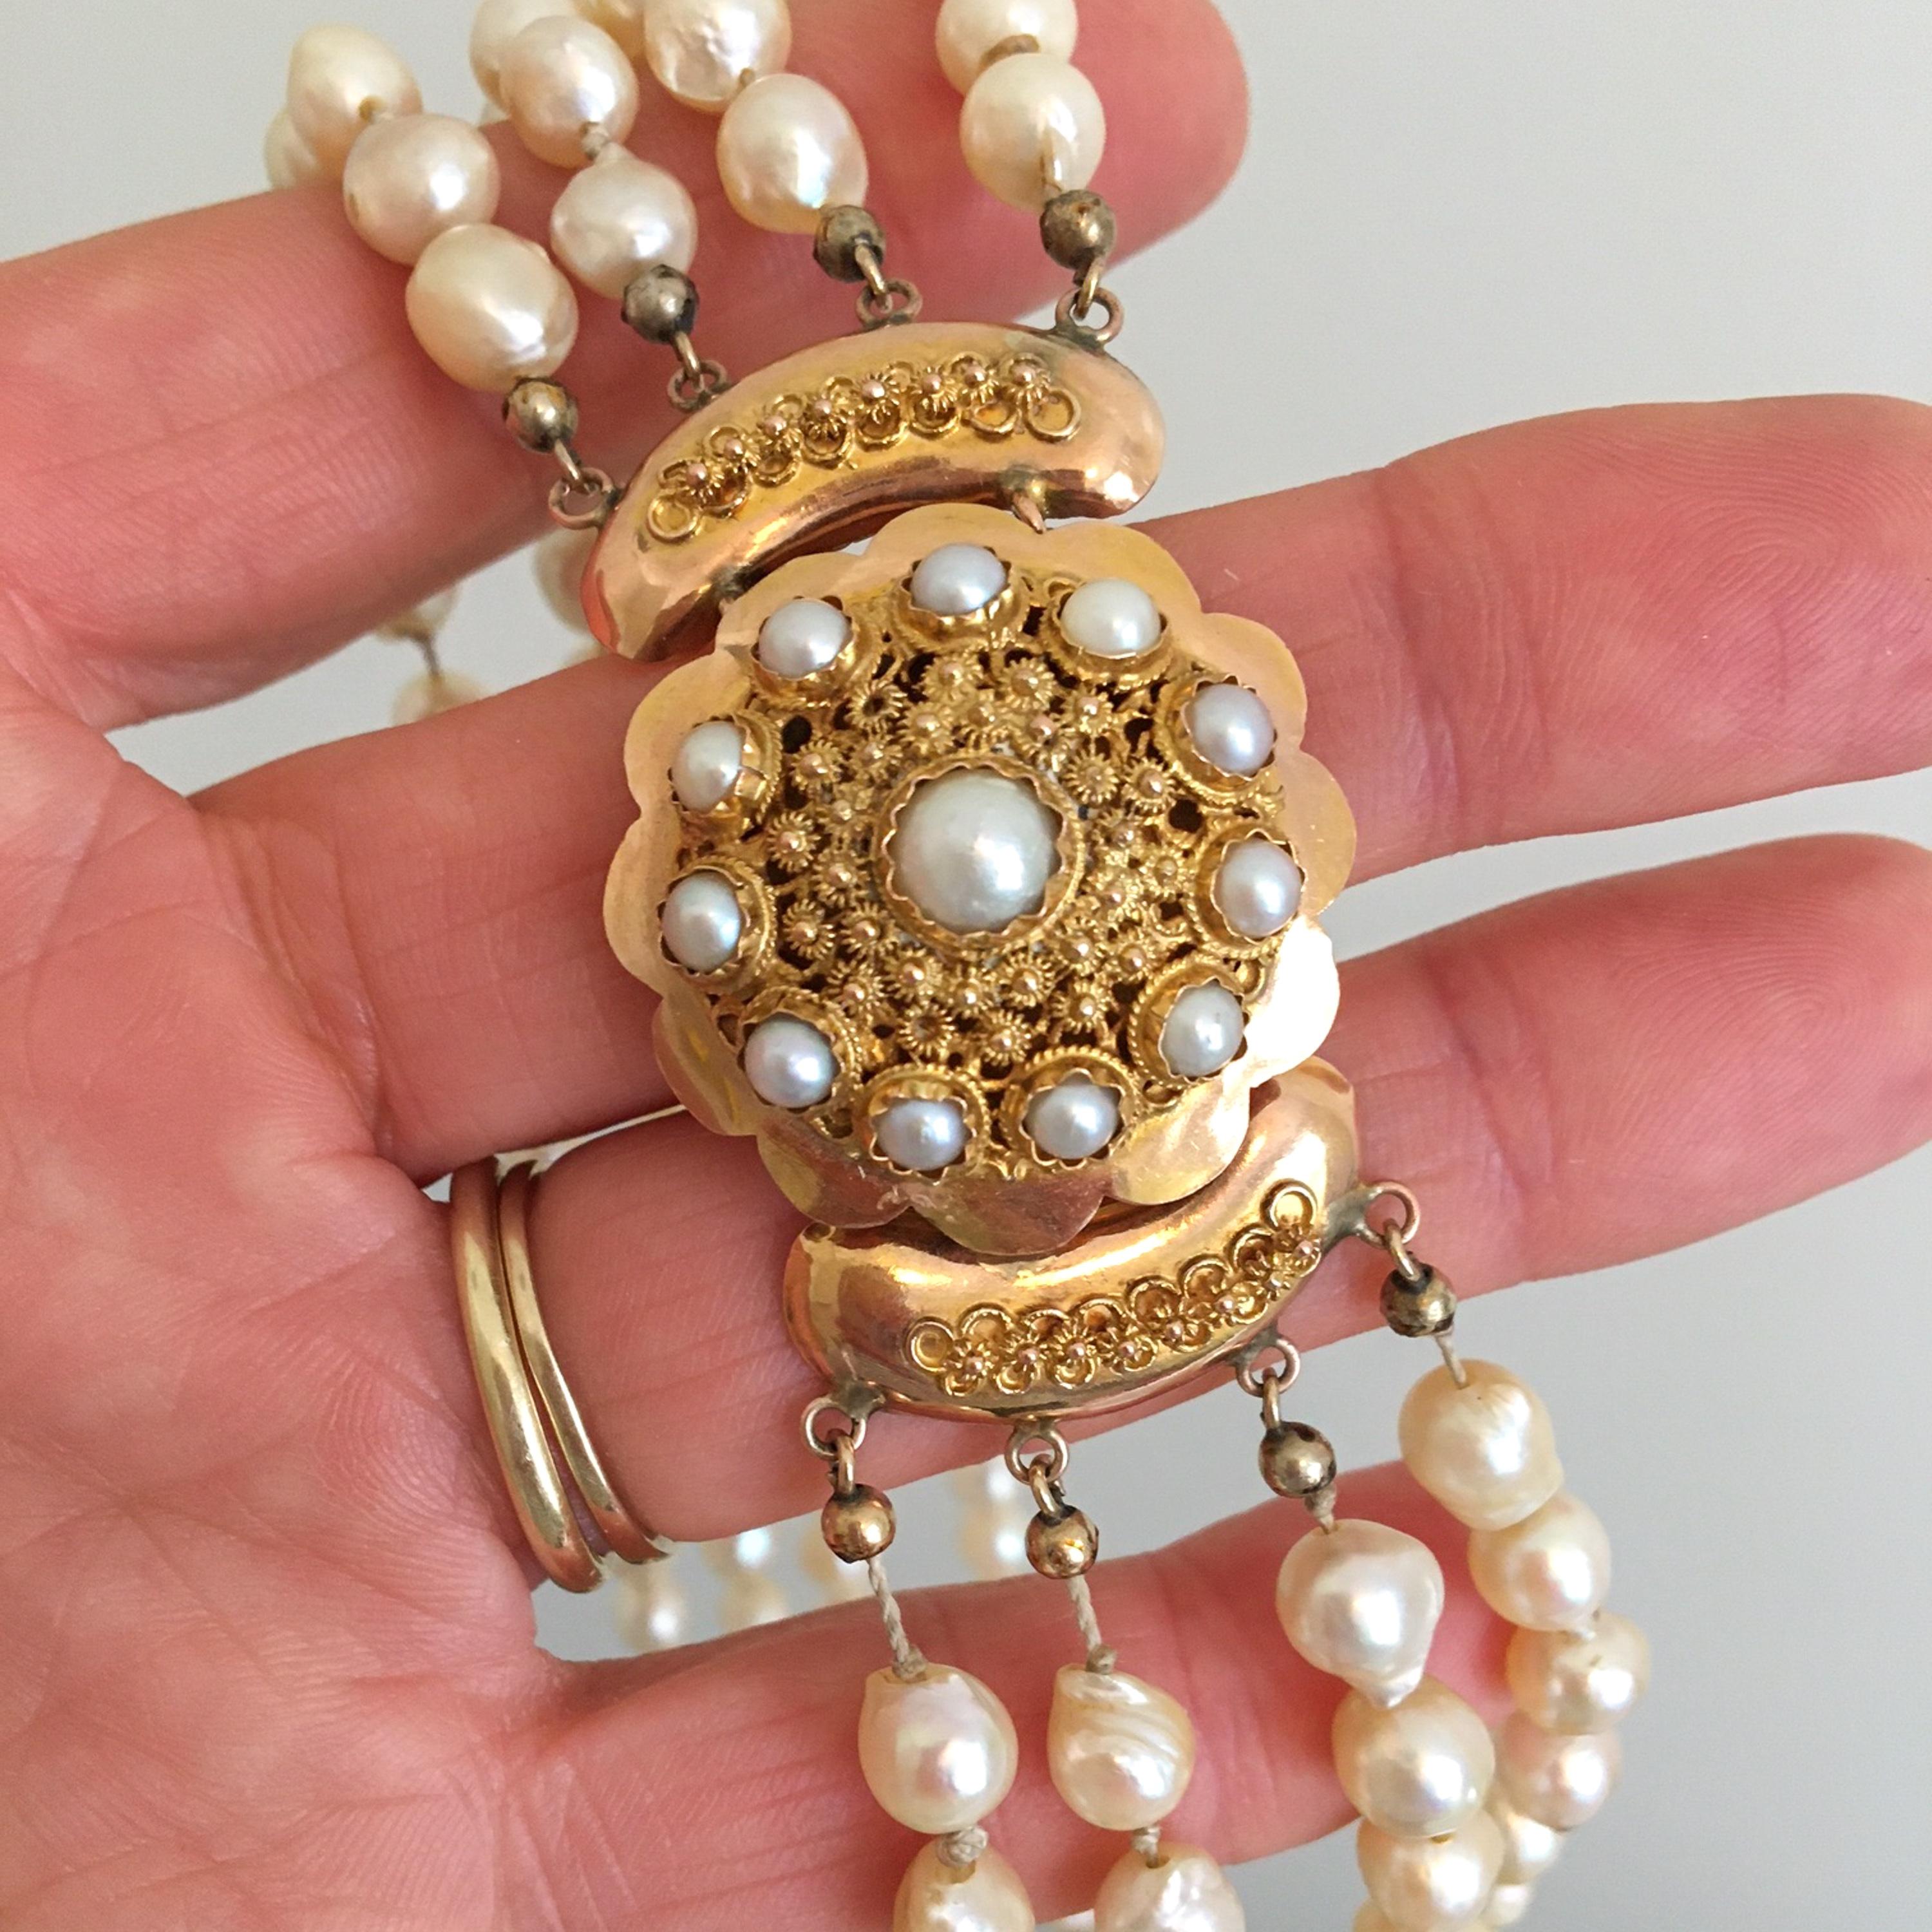 A freshwater cultured pearl necklace set with a round 14 karat gold clasp. The clasp consists of twelve clear cultured pearls surrounded by very fine filigree. The ornate clasp has rope motifs around the pearls and a beautifully scalloped border.